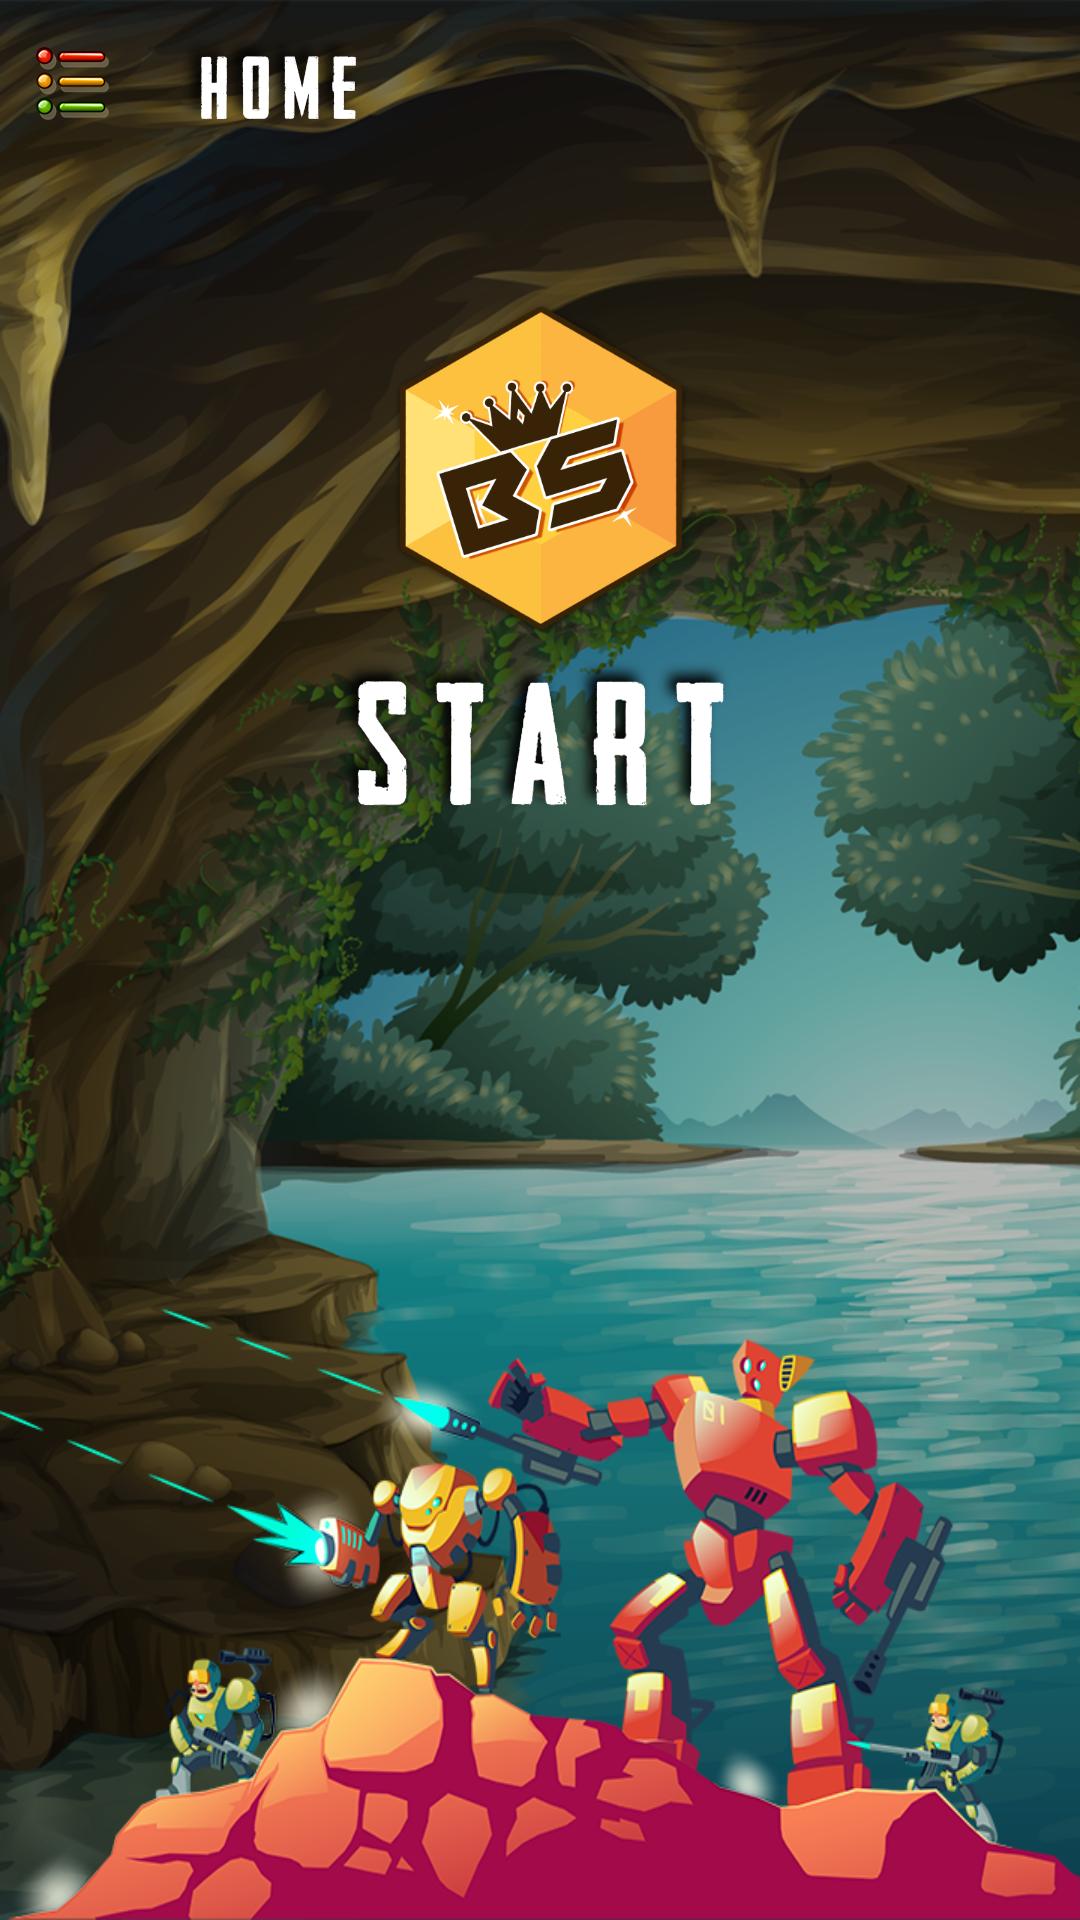 Brawl Star For Brawler Stars Unofficial For Android Apk Download - apkpure brawl stars android